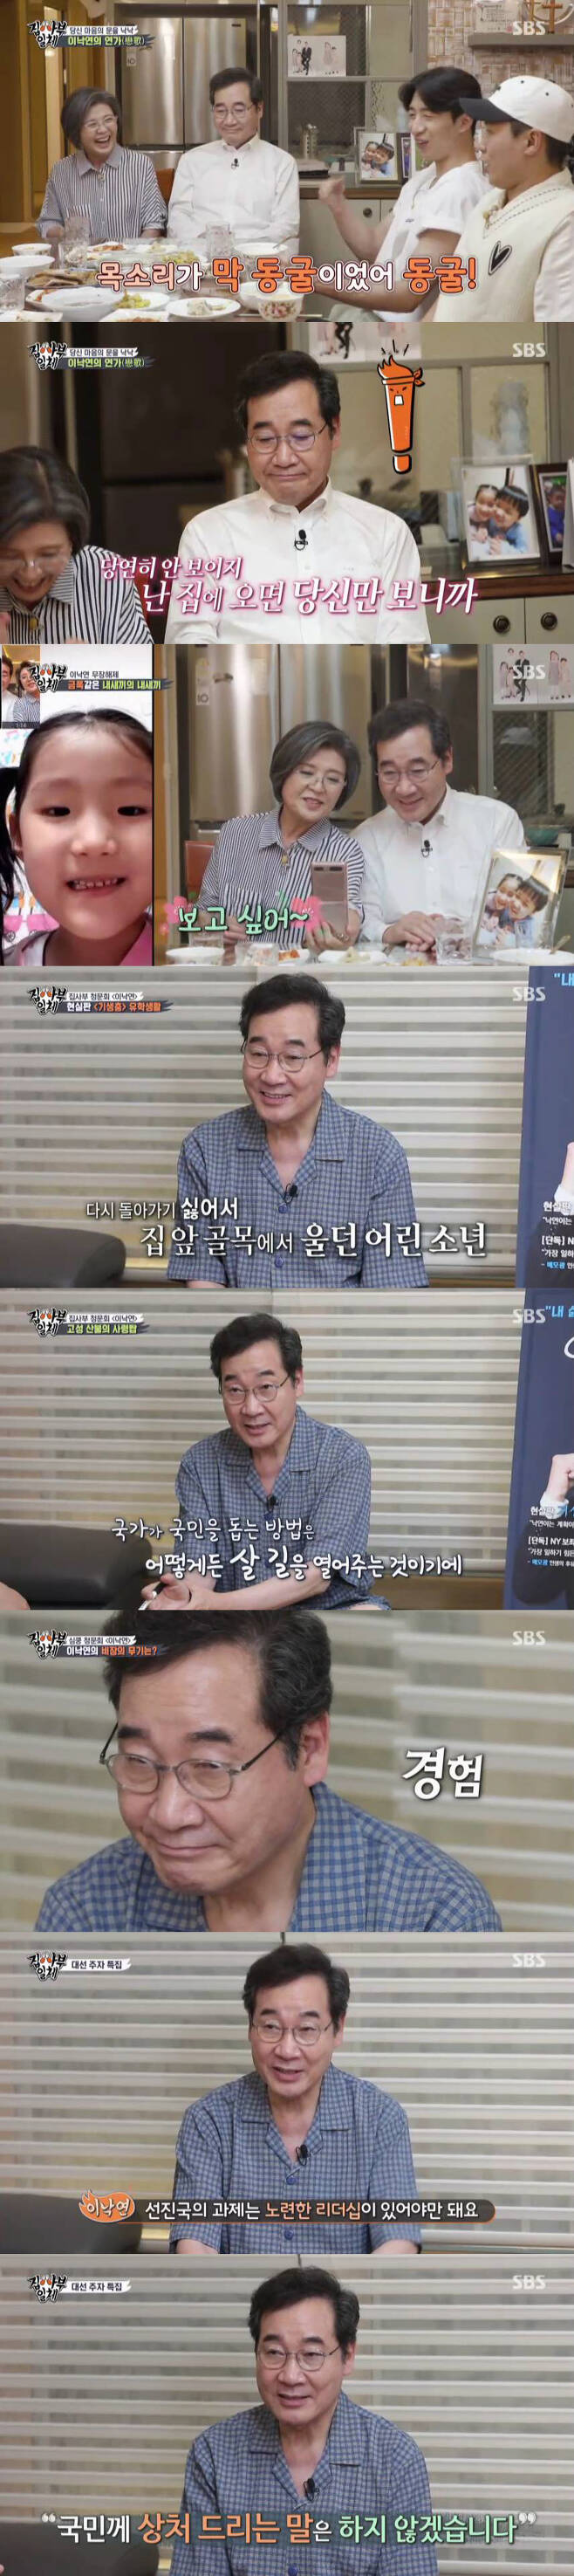 Lee Nak-yeon, former Democratic Party leader, appeared as master in All The Butlers.SBS All The Butlers broadcast on the 3rd was followed by the presidential candidate Big 3 special feature.Former prosecutor general Yoon Seok-ryul and Gyeonggi Province Governor Lee Jae-myung appeared as masters, and Lee Nak-yeon, former Democratic Party leader, appeared on the show.Lee Nak-yeon welcomed the members with his wife Kim Sook-hee at his home.He revealed his love story with his wife, revealed his desire for humor, or talked with members in pajamas.Asked about the occasion when Lee Nak-yeon decided to run for president, Lee replied, It was a responsibility.I experienced a lot of things nationwide, so I thought, If this is the case, it would be better for someone who has done it. The people also expressed a lot of expectations to me.In the following All The Butlers hearing, Lee Nak-yeon told the story of Gwangju studying abroad that it was a real version of the movie parasite.Lee Nak-yeon, who surprised the members by revealing that he started studying abroad at Alone Gwangju without a family when he was thirteen years old, revealed an anecdote that he had been living alone since middle school because of difficult family circumstances.Lee Nak-yeon said: It was extremely difficult - it was in poor nutrition, and it was something that was not seen at school at all.I was always lonely, hungry, and had no friends. Lee Nak-yeon then expressed his gratitude to the teacher who was a great strength during his school days and Friend who gave half of his salary to study after entering college.He said, My youth debt, he said. My body is not my body, but my heart is that it is the many people who fed me.I lived in the grace of so many people, he added.Since then, the members have asked about former prosecutor general Yoon Seok-ryul and Lee Jae-myung, governor of Gyeonggi Province, as a common question for the presidential candidate.Asked about the strengths he wanted to bring from the two, Lee Nak-yeon cited the ruggedness of the young seak-ryul and the quickness of Lee Jae-myung.On the contrary, he said, I do not think it is a direct measure, but the government, the National Assembly, the central government and the local government, the internal affairs and diplomacy, and the military have not done anything.If I add another thing, humor will be much better for me, he added, laughing.Lee Nak-yeon then answered the question I am the 20th President of South Korea confidently, YES (Yes) and said, It is the closest to the requirements of the leader needed for South Korea now.South Korea has been incorporated into advanced countries this year; South Koreas task is as a developed country, he said. The task of developed countries must have experienced leadership.Lee Nak-yeon also said: Korea relies on trade for 80 percent of India, and it should also do diplomacy for India.But I am the only one who has done diplomacy. Finally, Lee Nak-yeon asked, If I become president, I will never do it. I will not say anything that hurts the people.I will not give such a hurt or a shame that I will doubt my personality. He said, I was disappointed that my countrys face was that much. I would not do this.